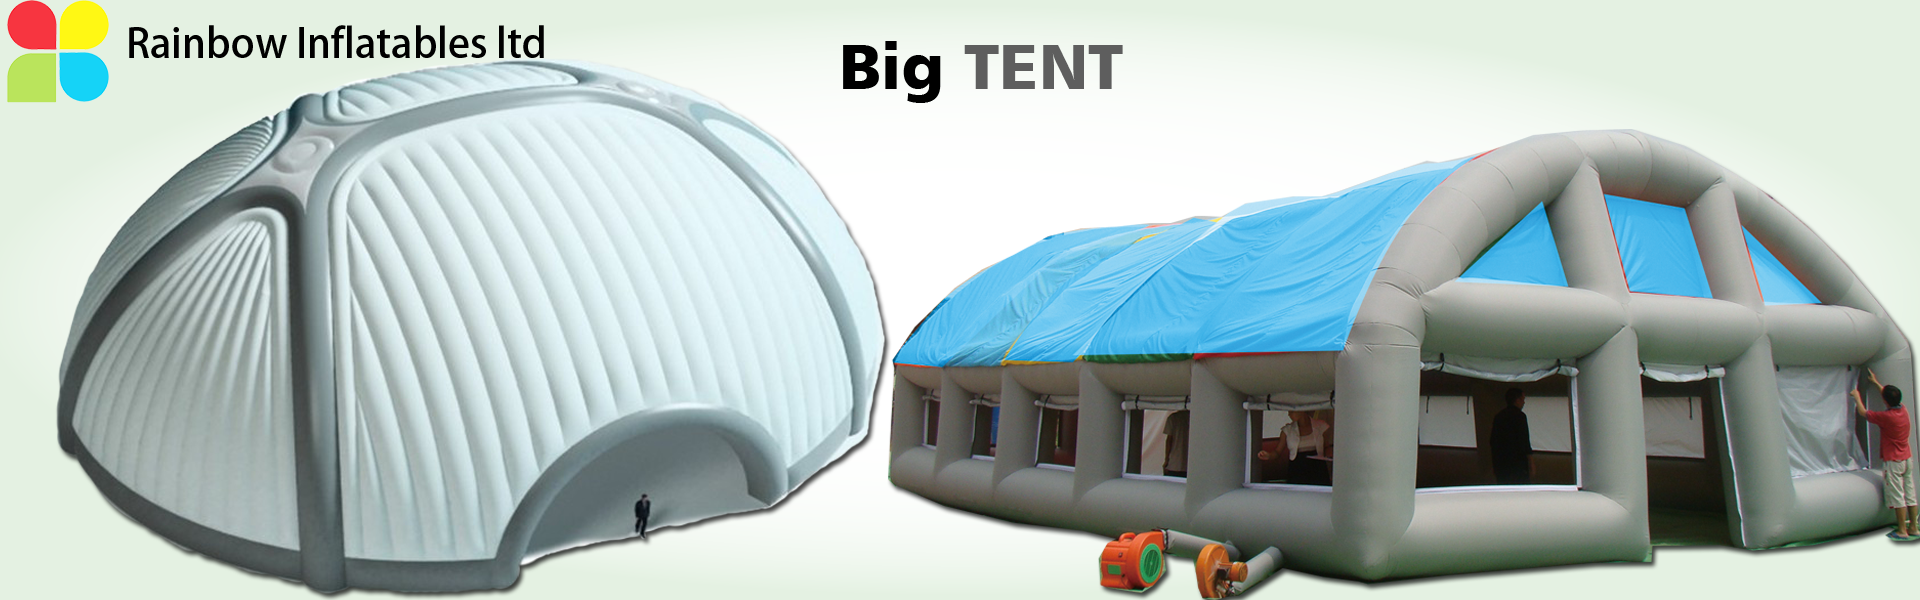 huge inflatable tent